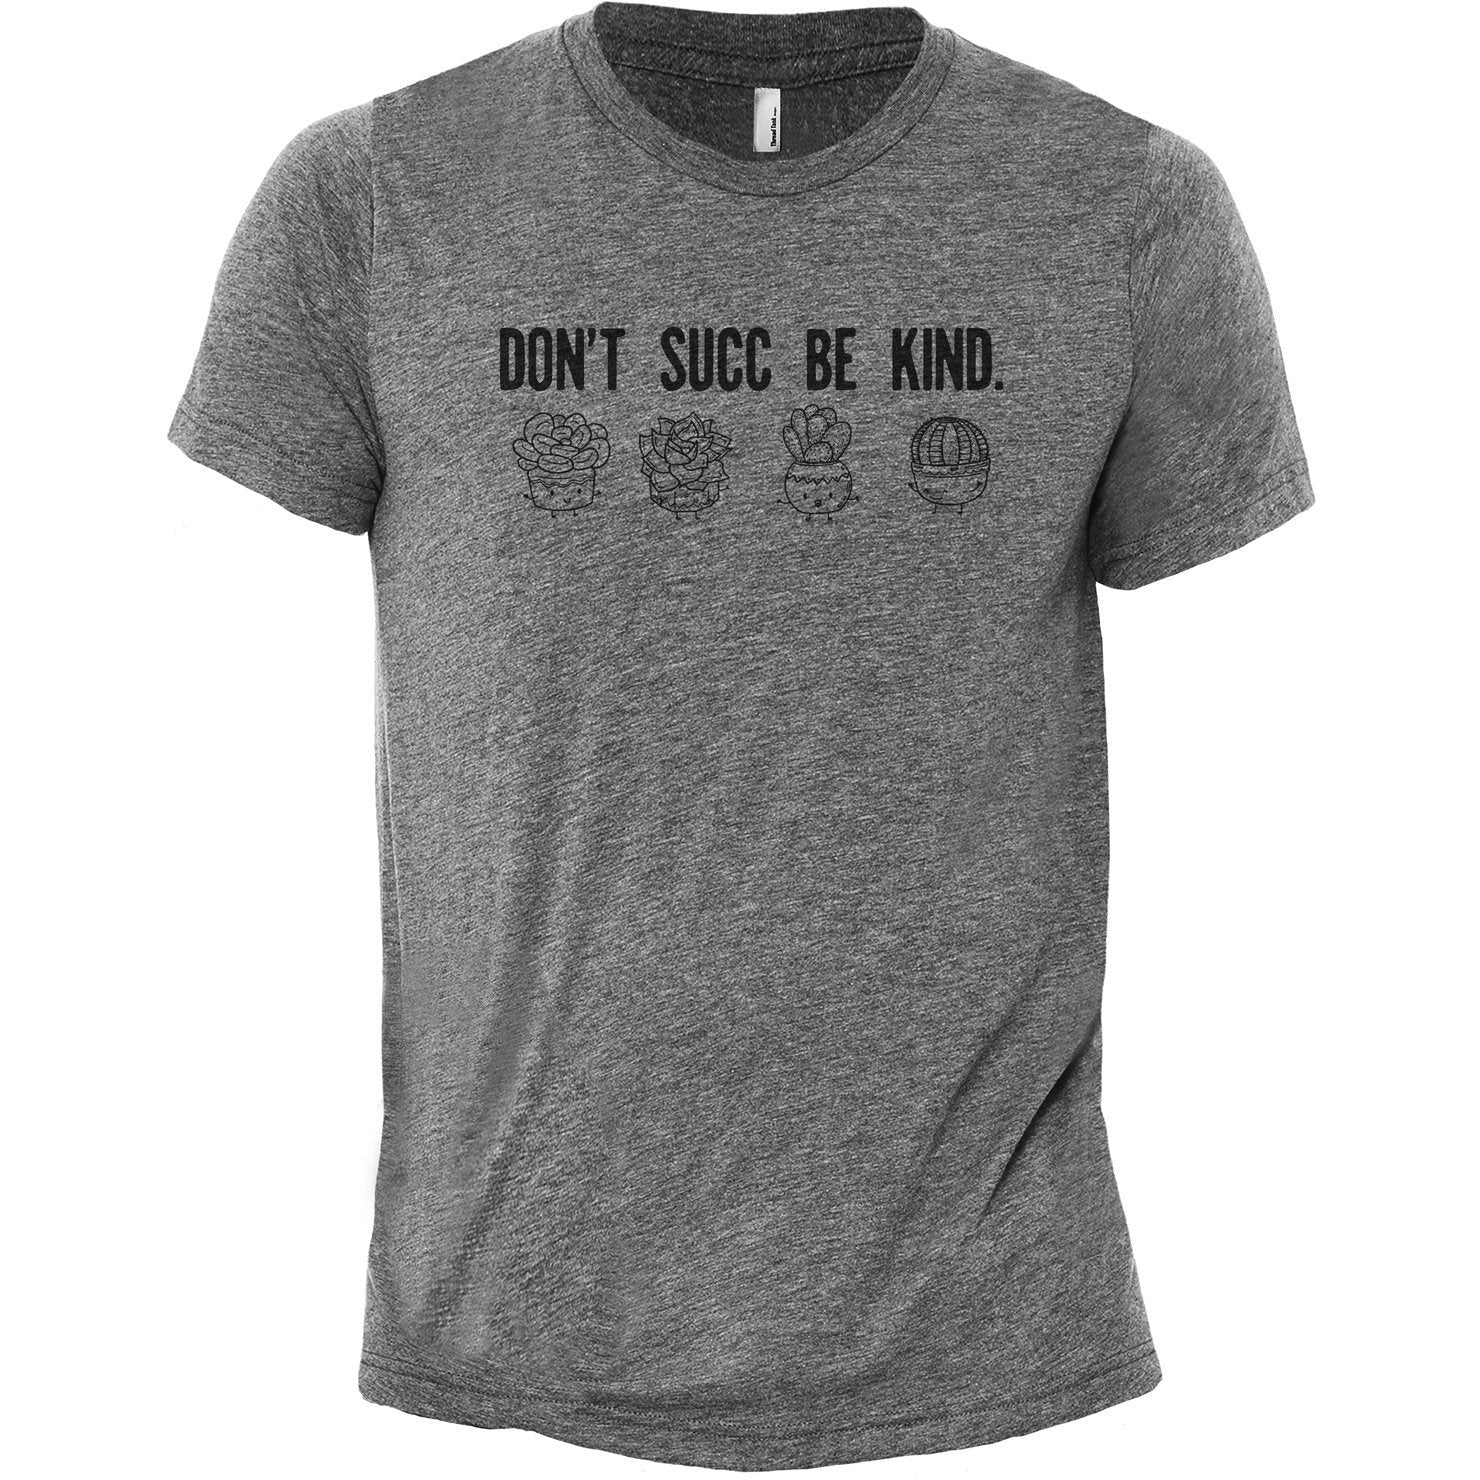 Don't Succ Be Kind Heather Grey Printed Graphic Crew T-Shirt Tee